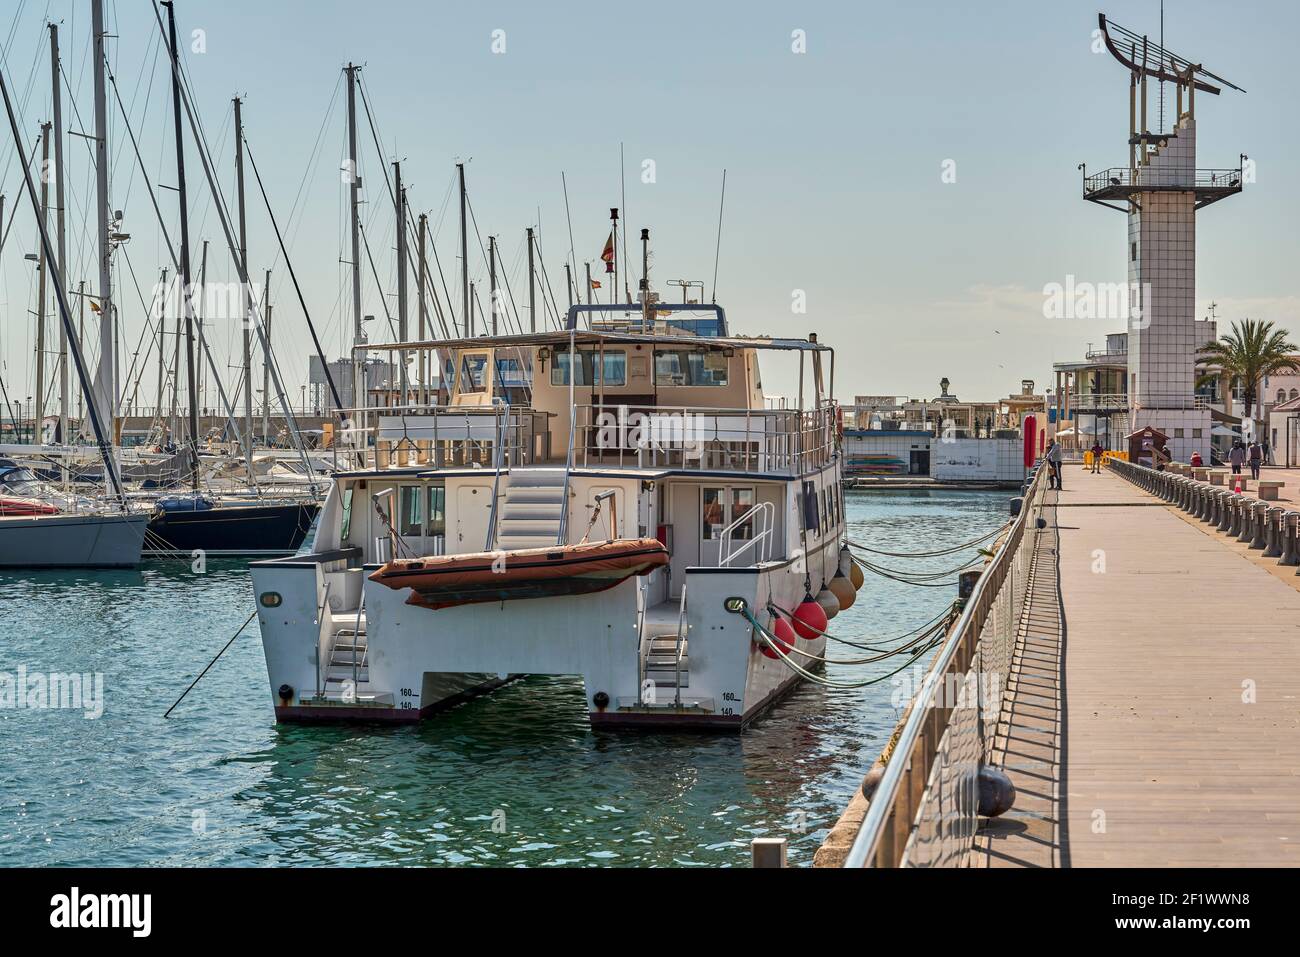 catamaran moored in the harbor, harbor of the Grao maritime district in the city of Castellon, Spain, Europe Stock Photo